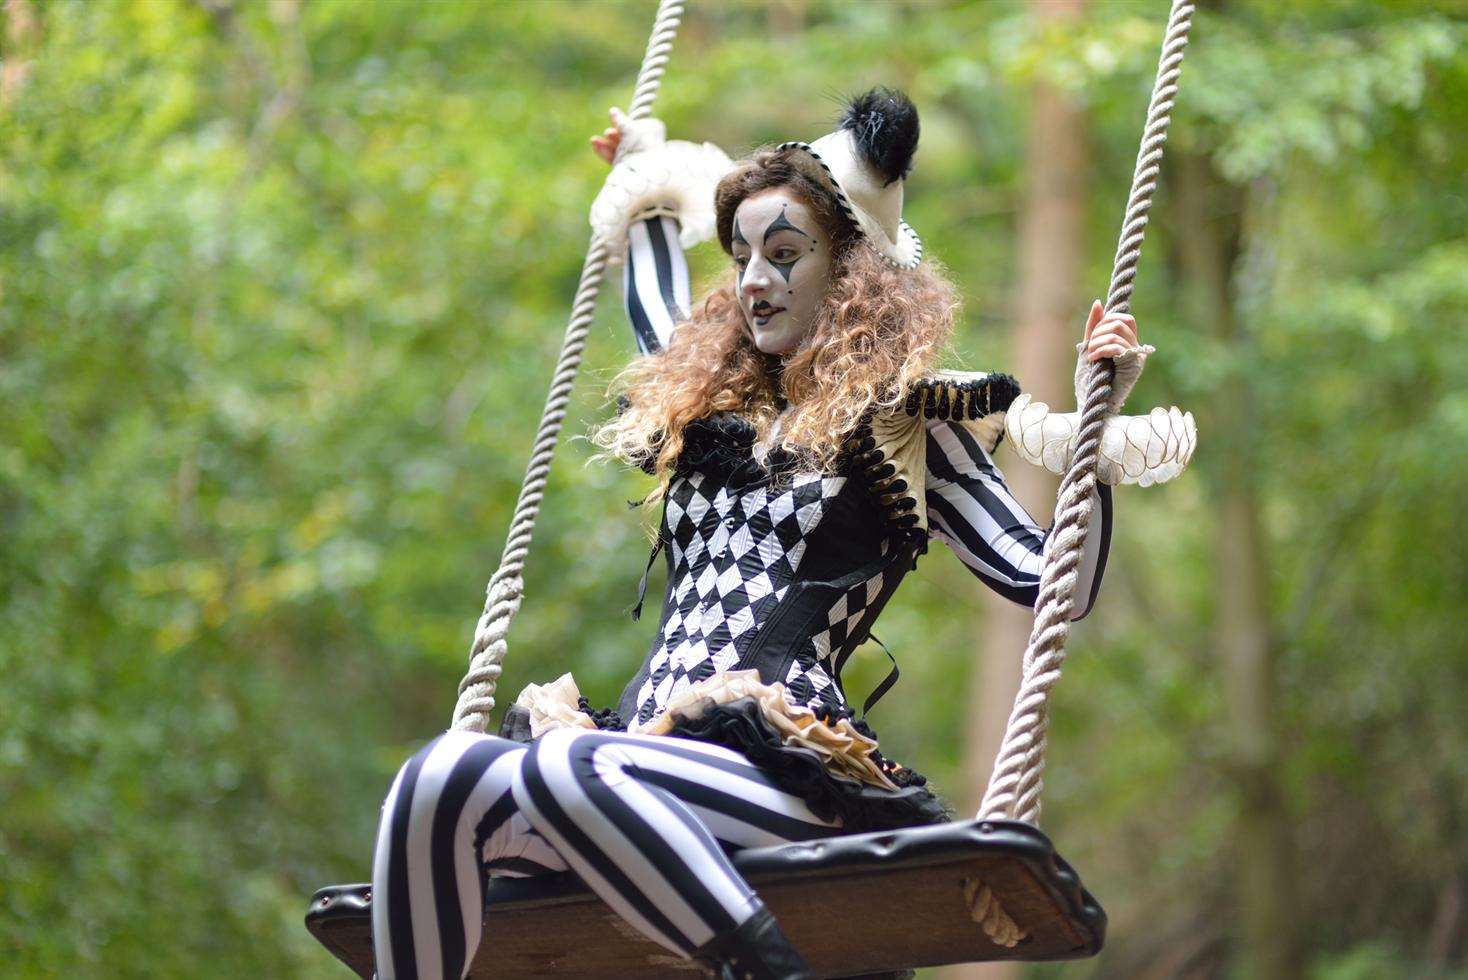 Meet the enchanted characters at Groombridge Place